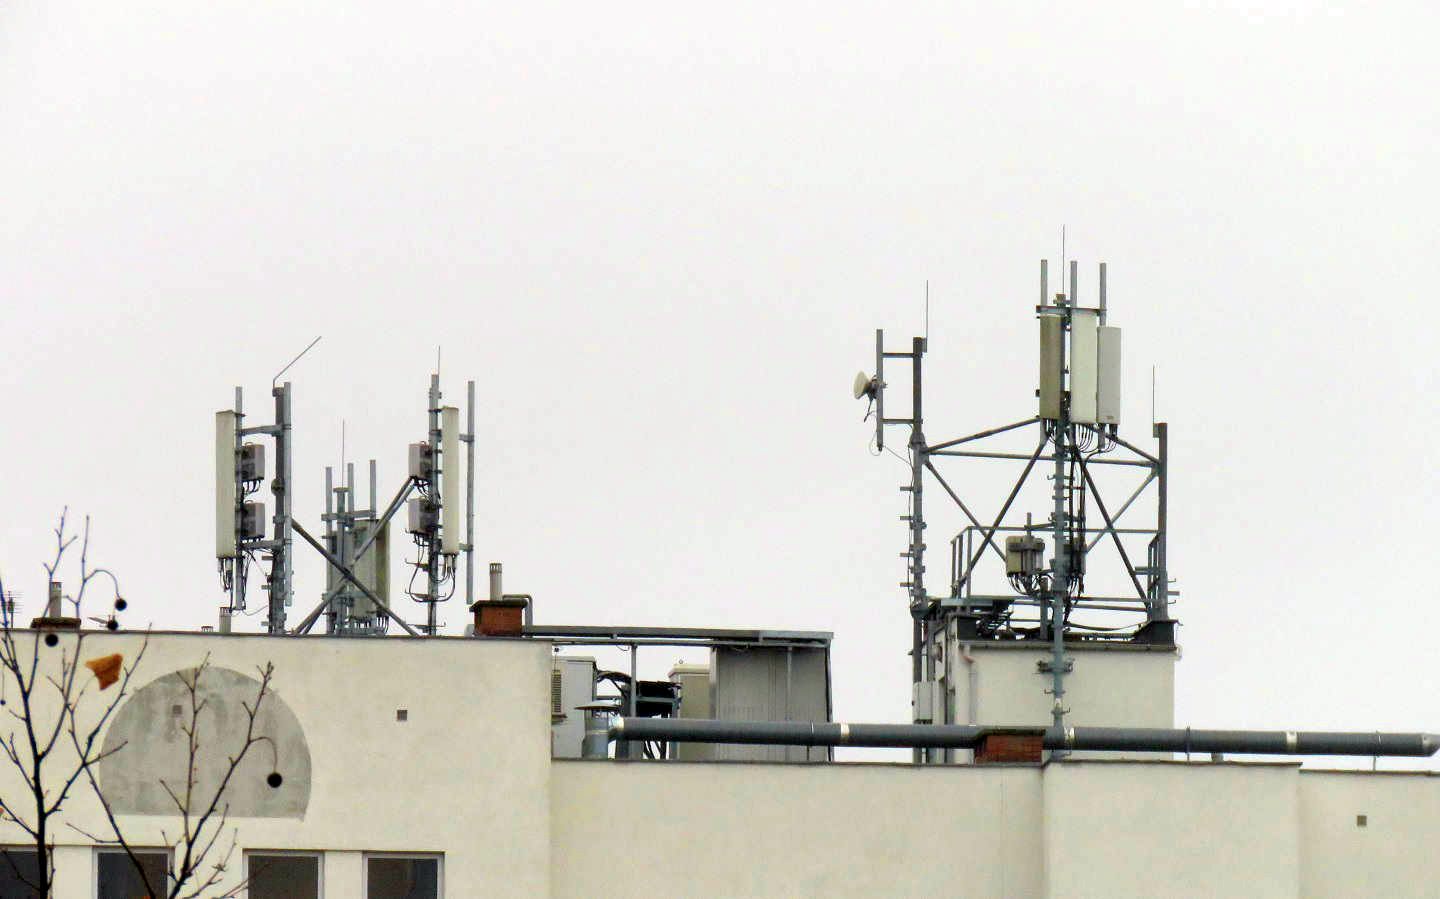 Multi-Operator Rooftop site with T-Mobile, Orange and Plus.